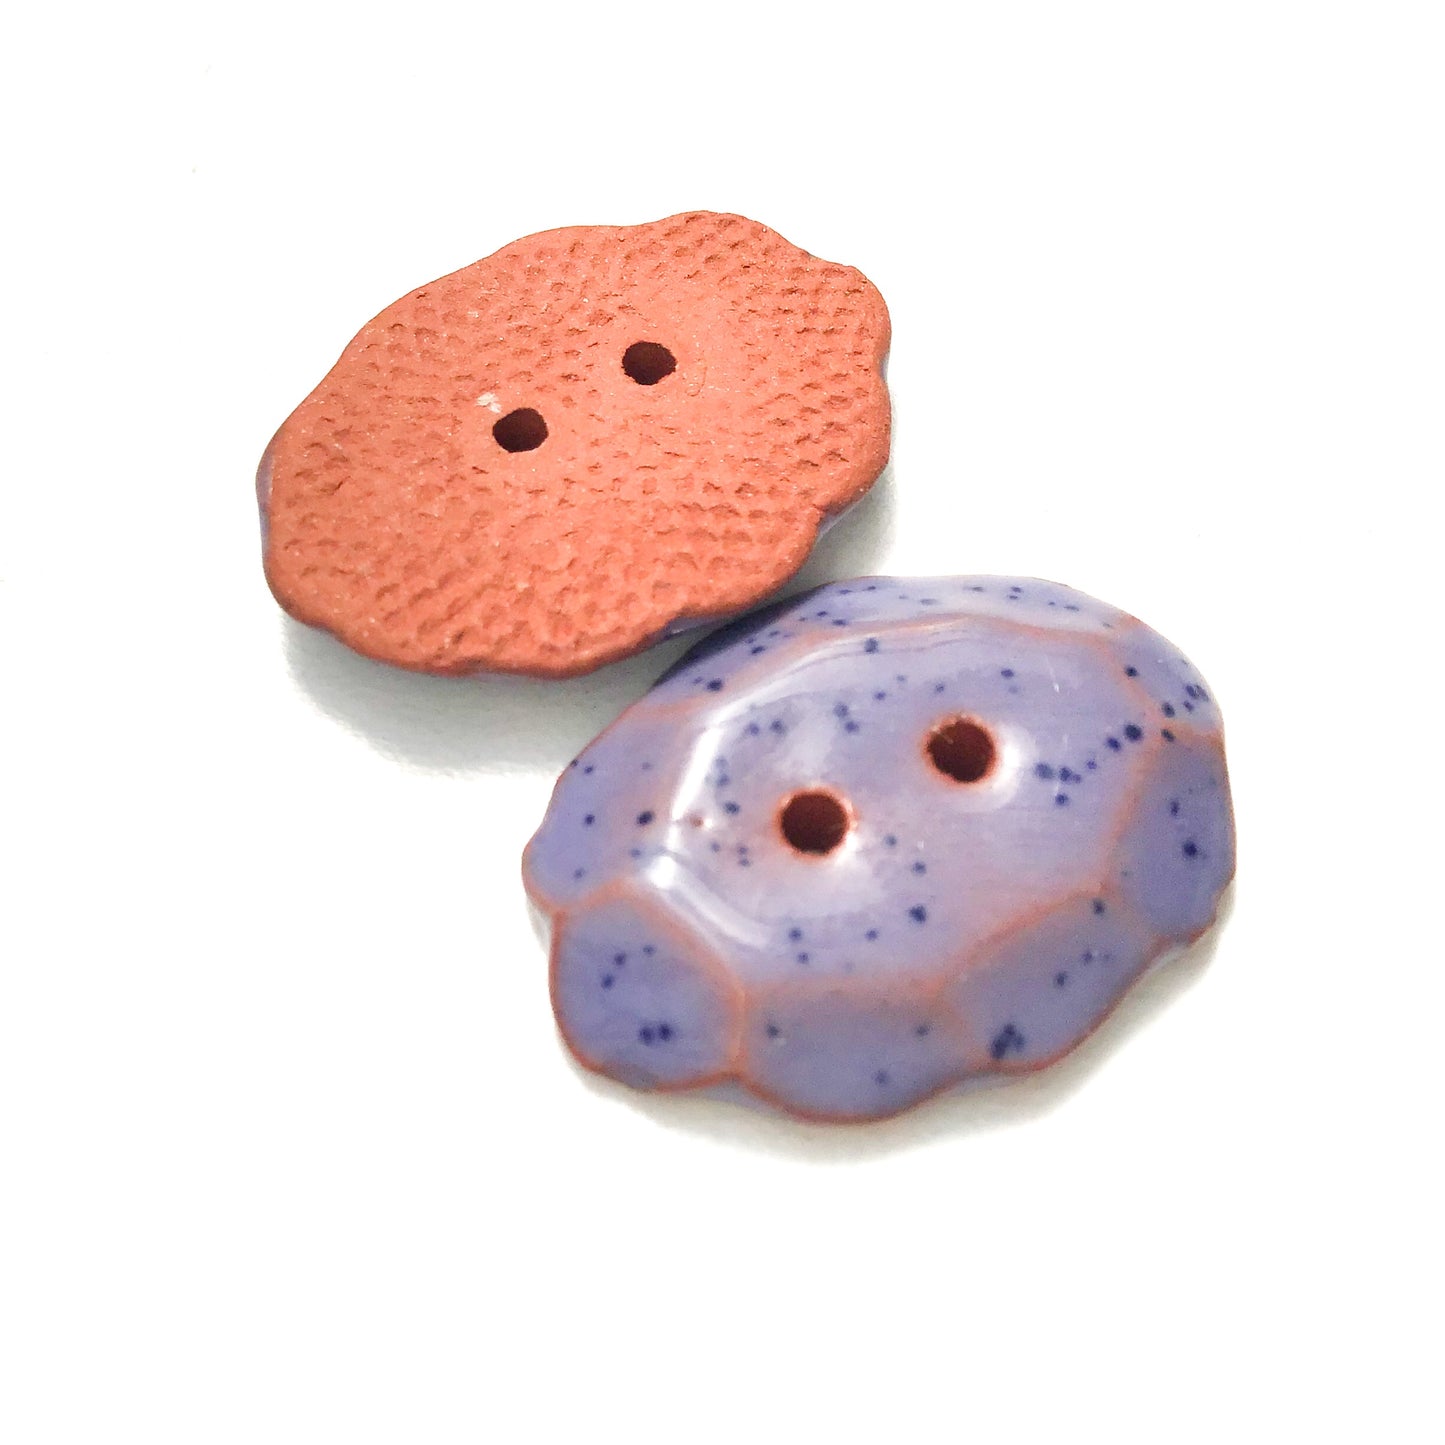 Speckled Purple Ceramic Buttons - Oval Clay Buttons - 3/4" x 1" - 2 Pack